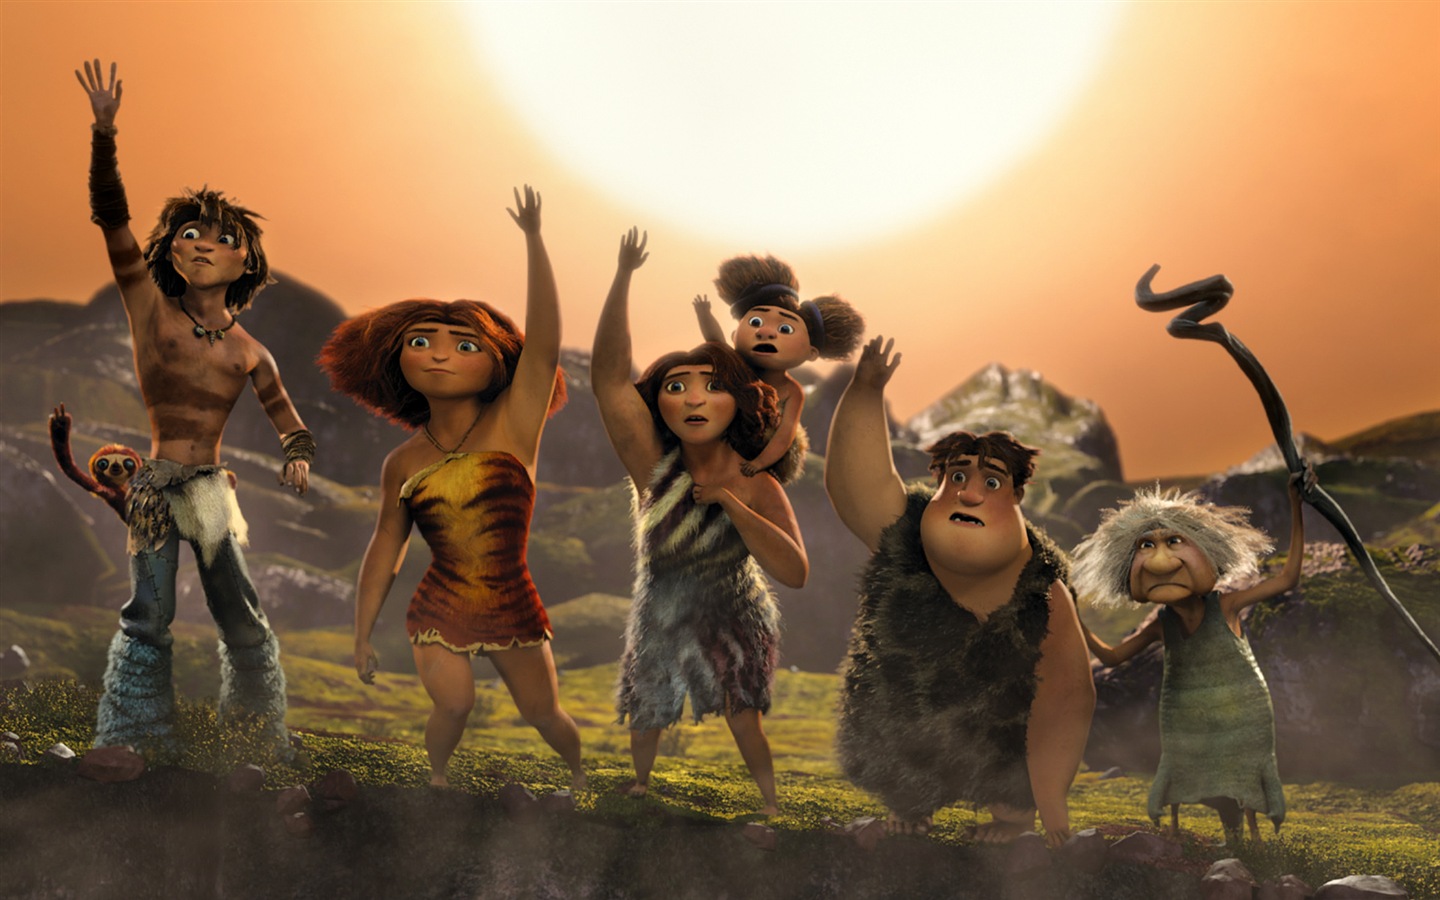 V Croods HD Movie Wallpapers #4 - 1440x900